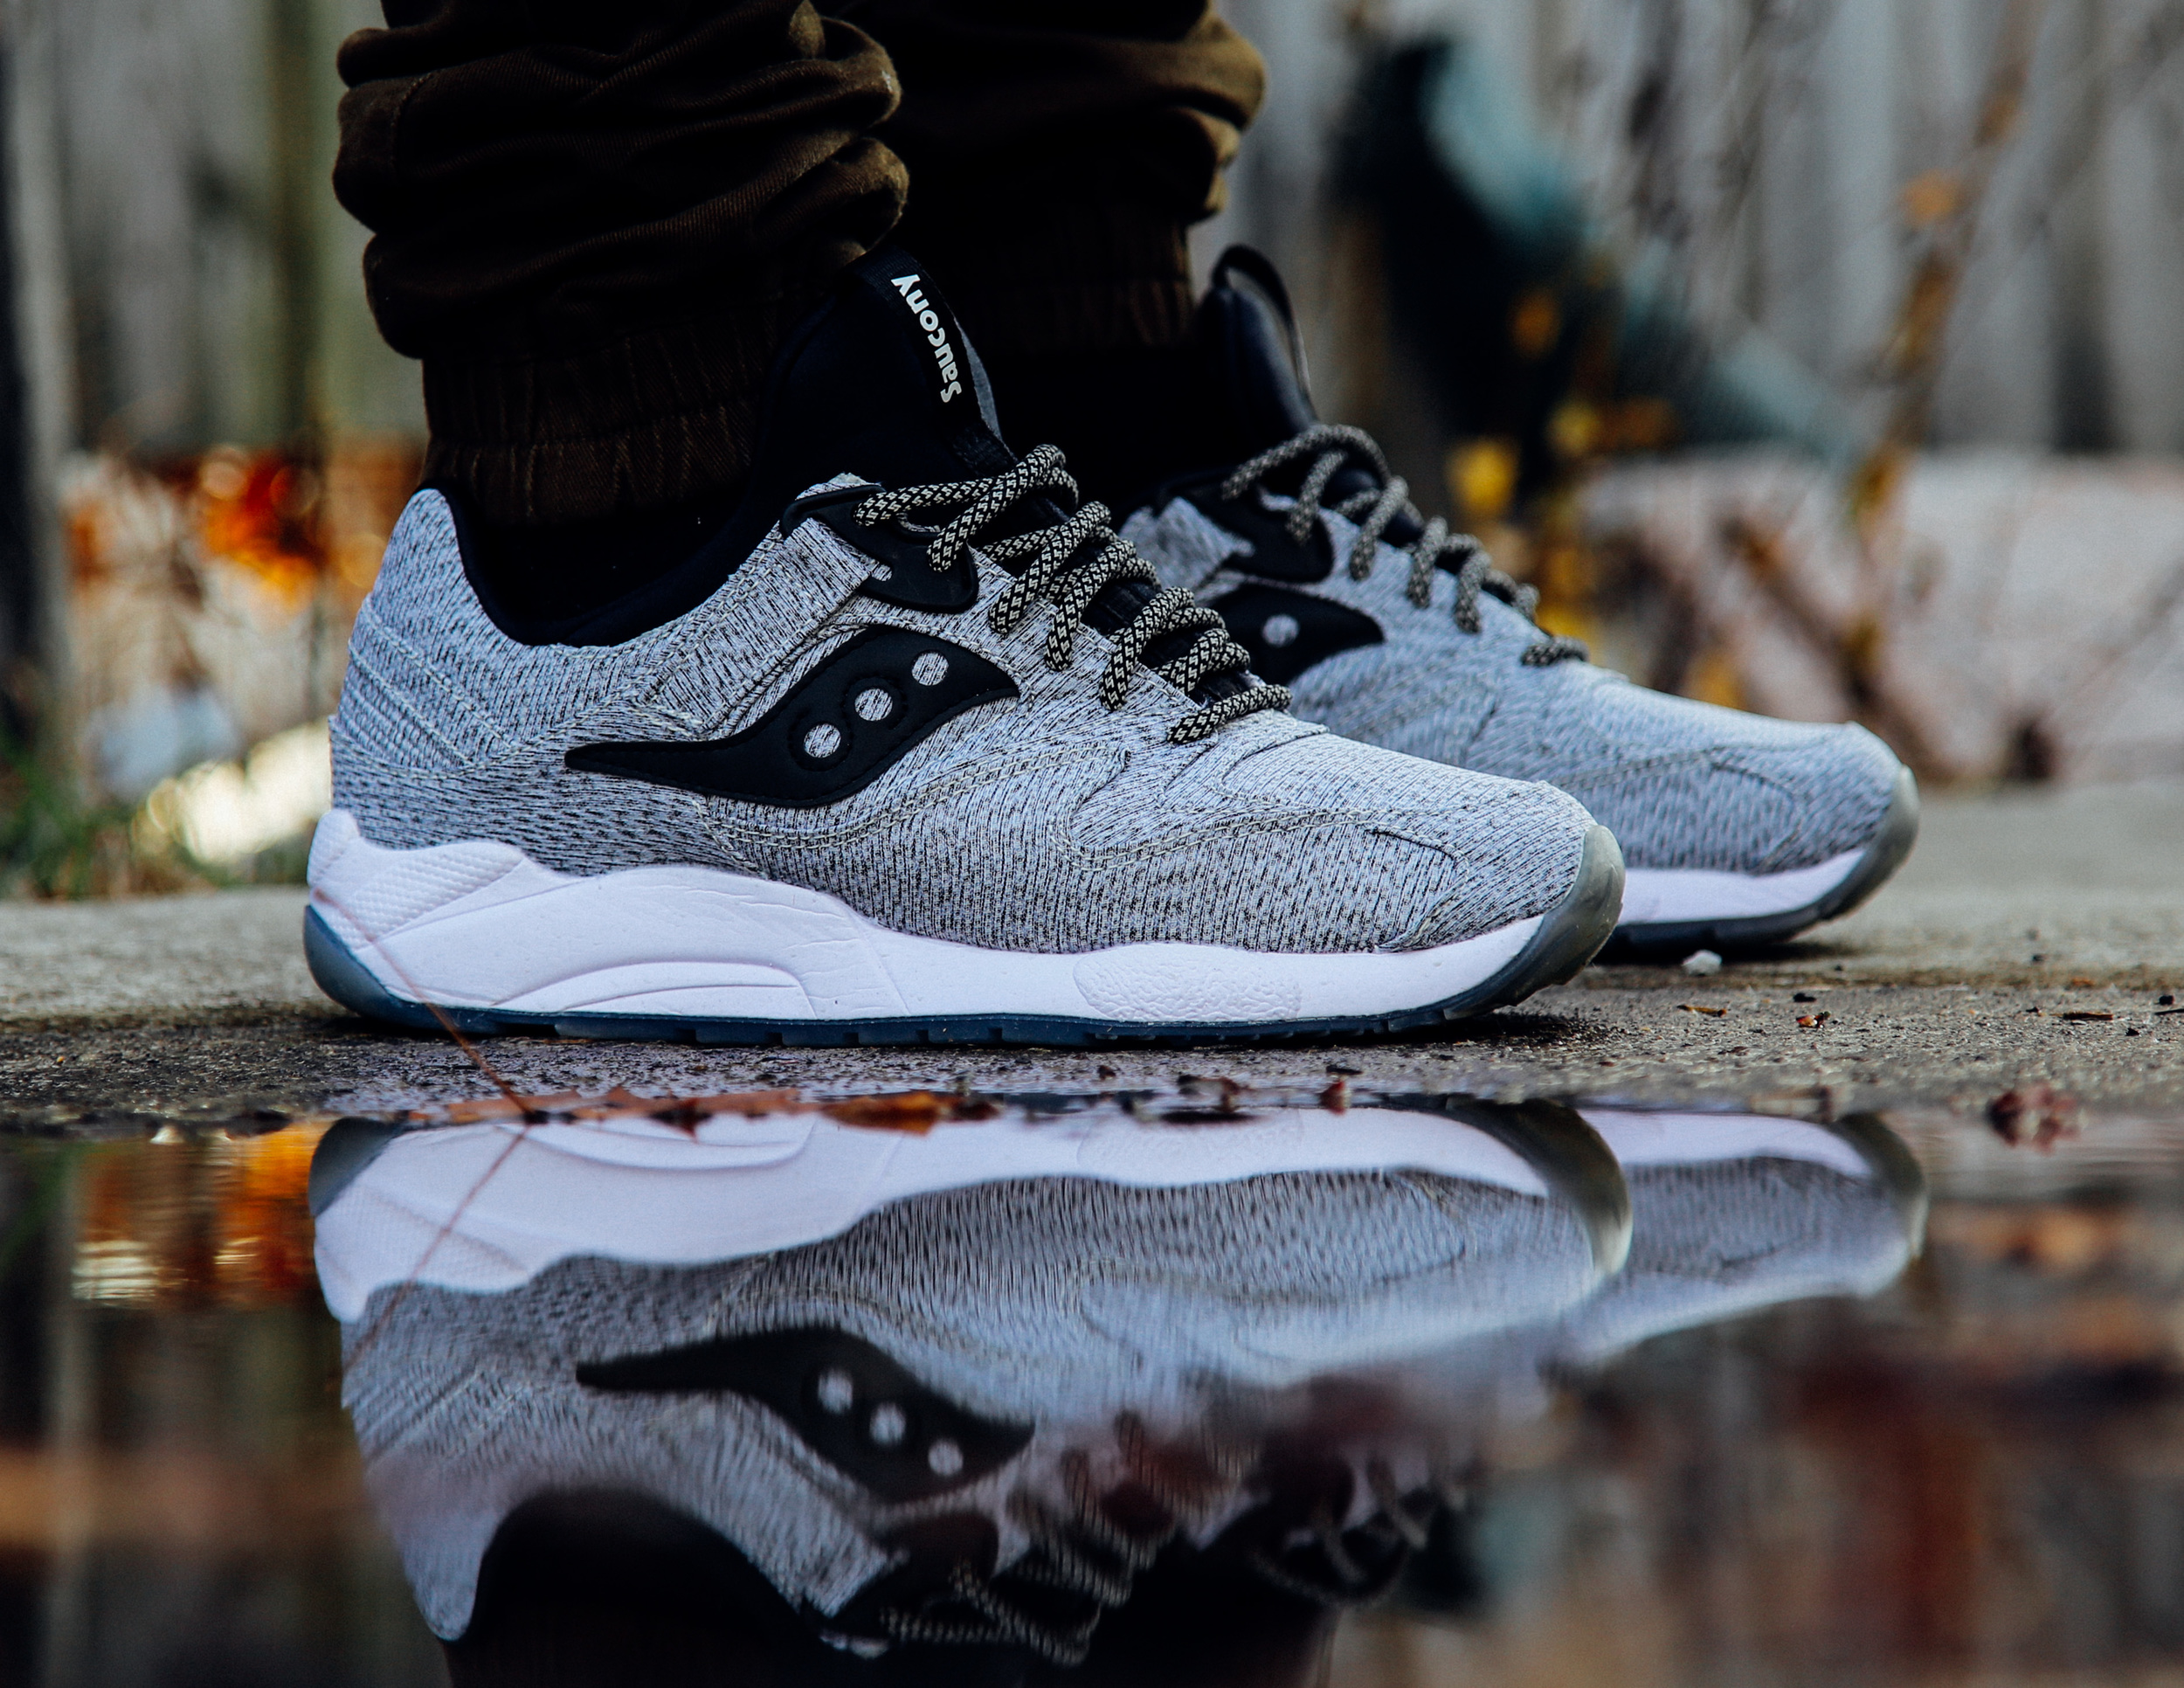 Exclusive On Foot Look at the Saucony GRID 9000 \